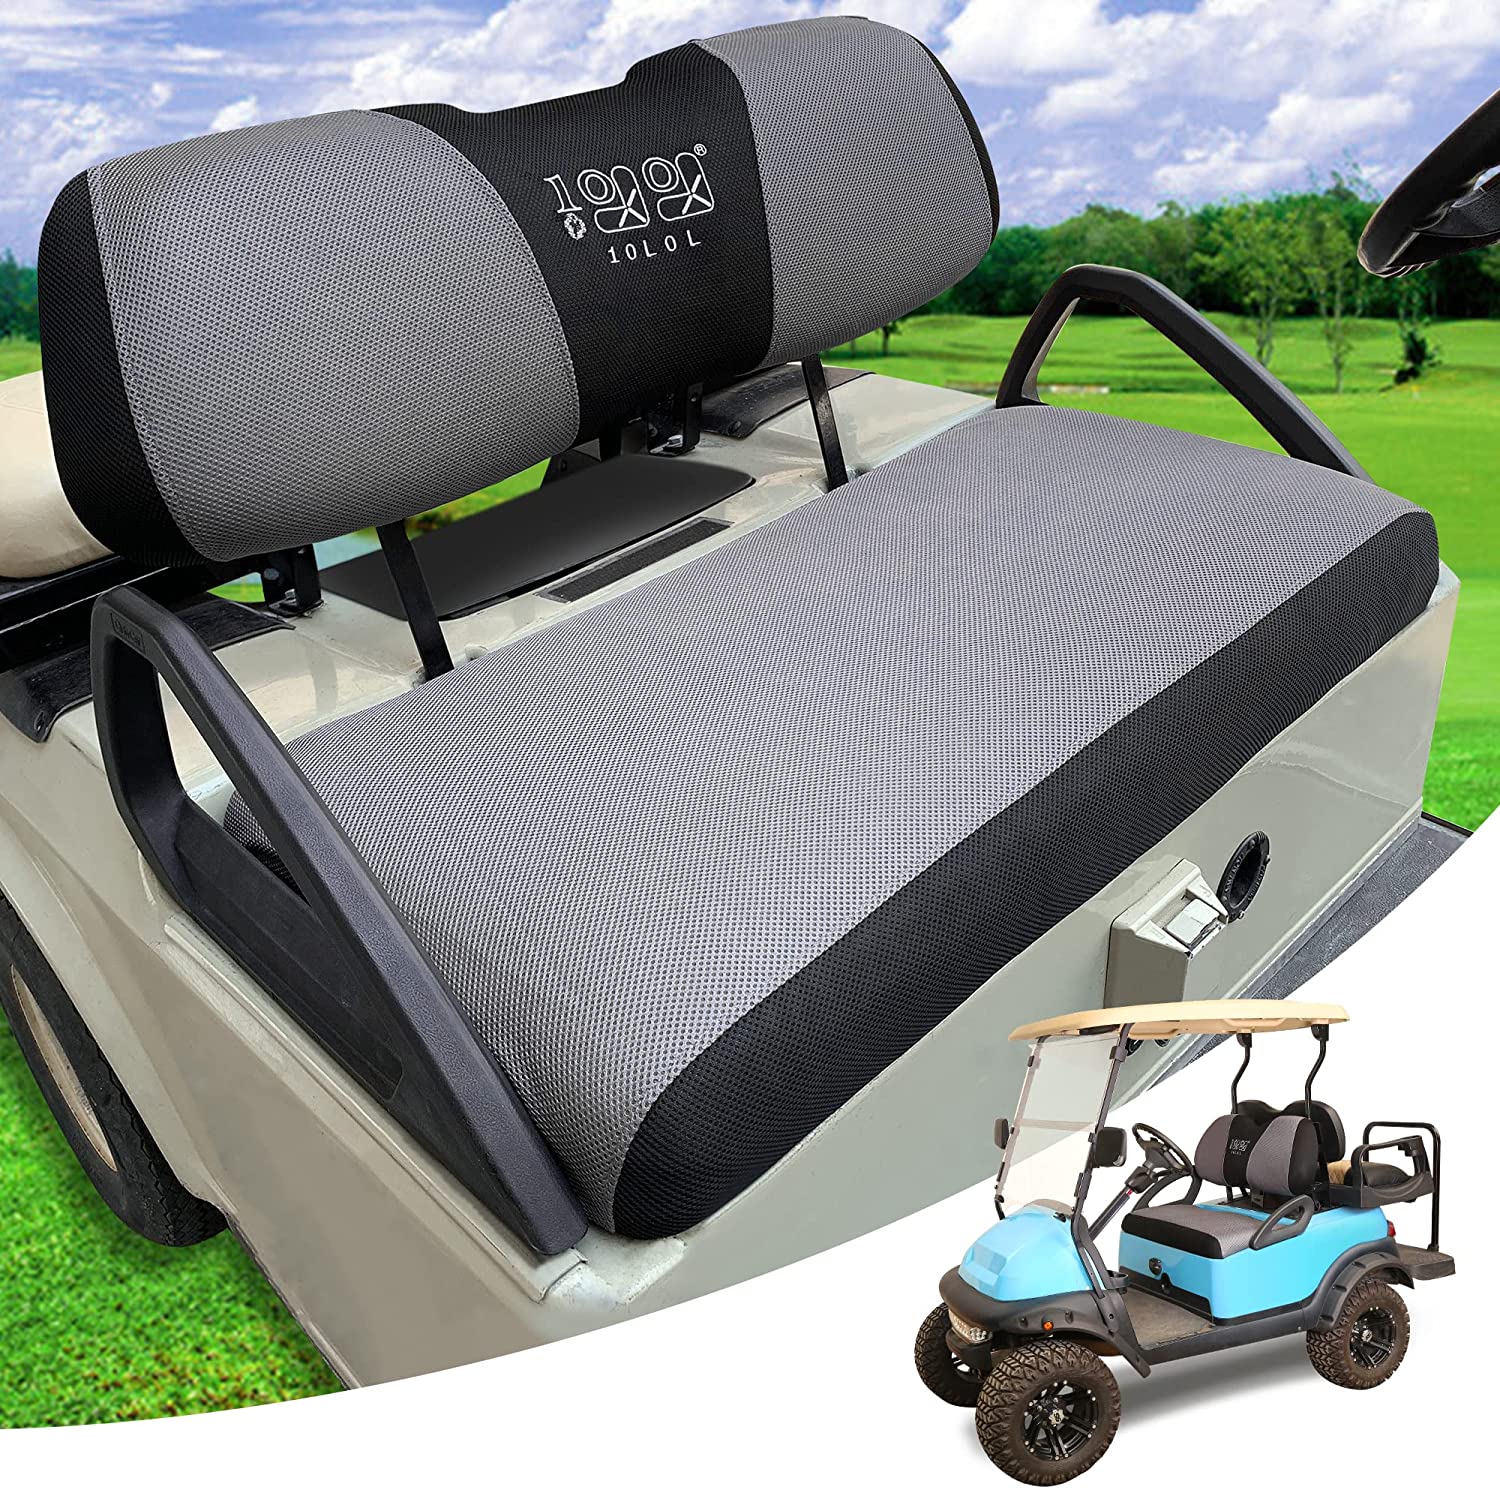 10L0L Golf Cart Seat Cover Fit Club Car Precedent Yamaha, Breathable  Polyester Front / Rear Seat Cover- L - Walmart.com